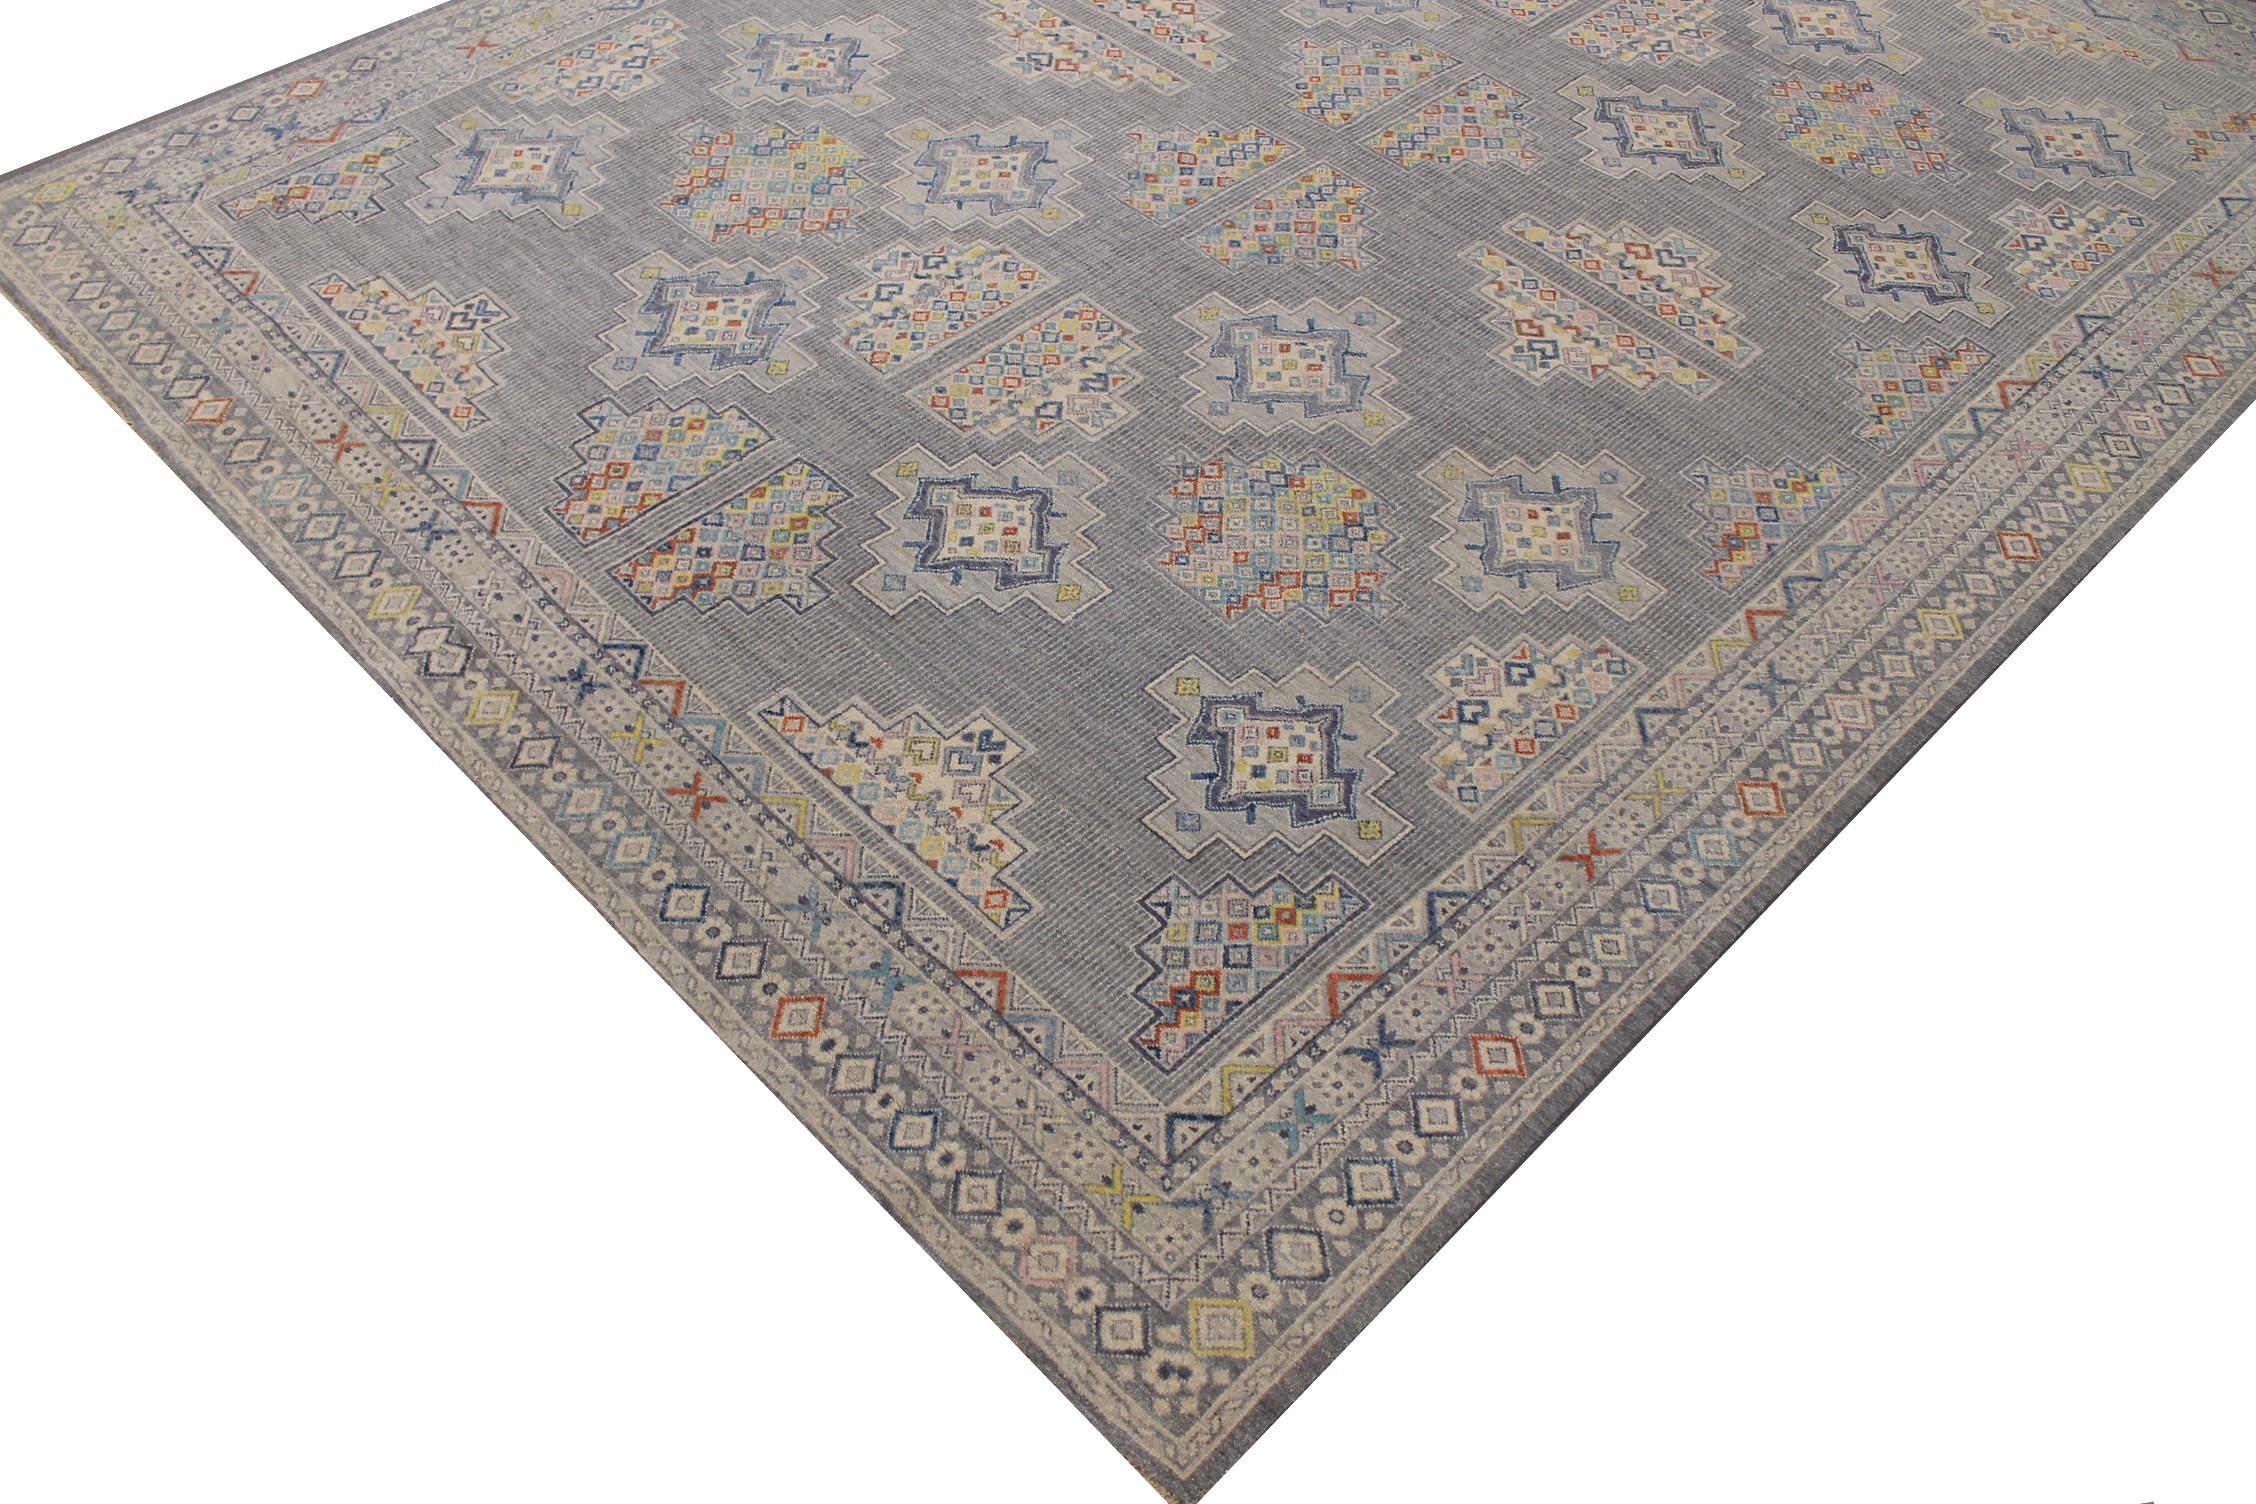 9x12 Peshawar Hand Knotted Wool Area Rug - MR026114